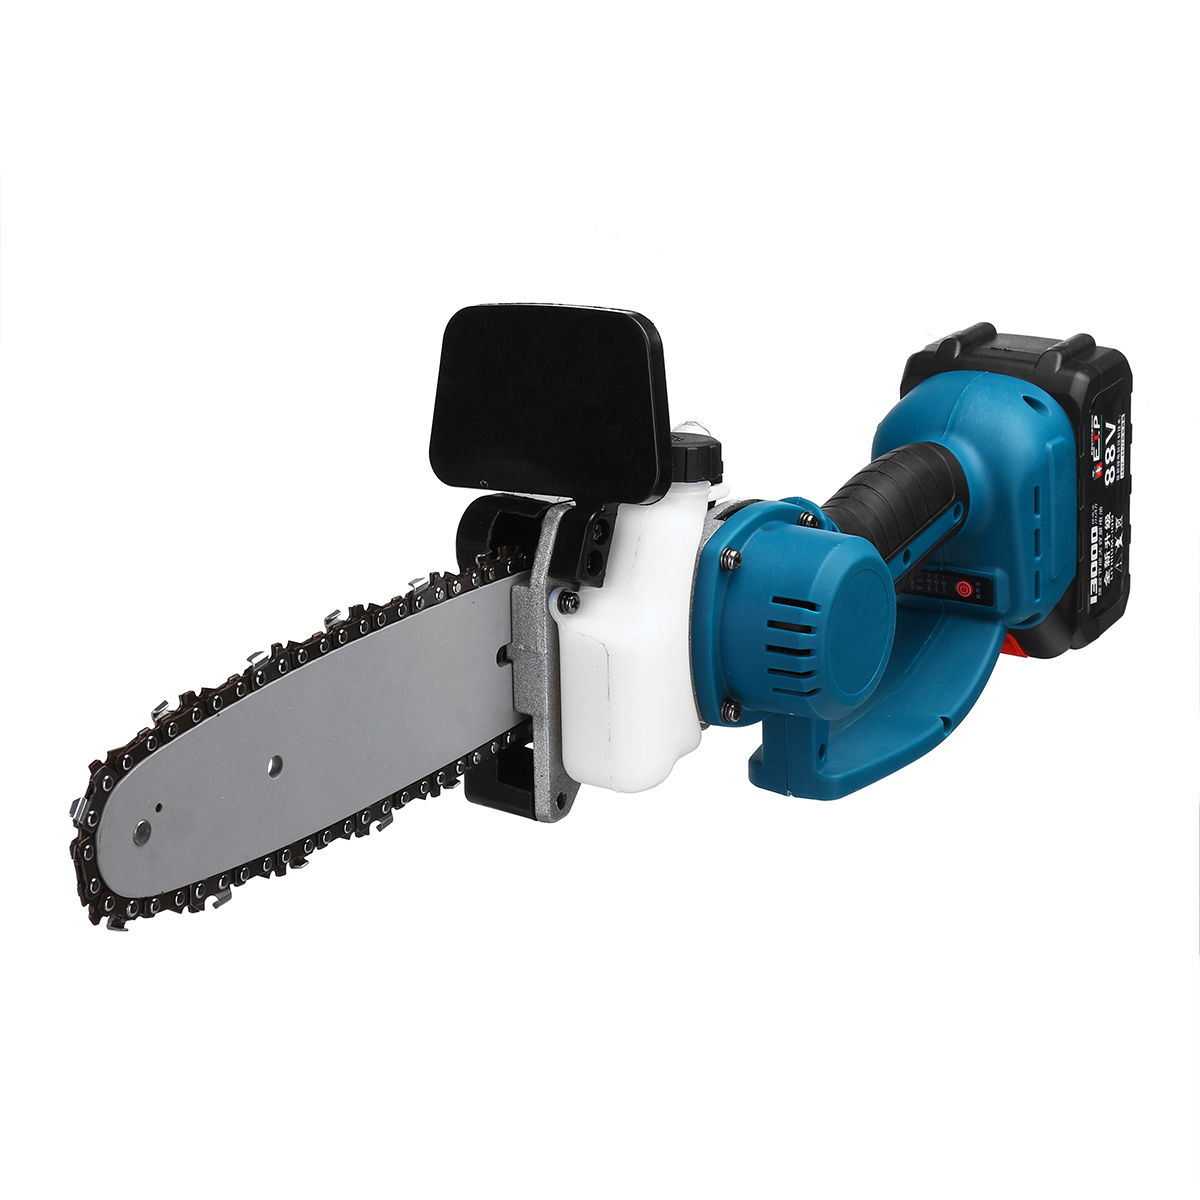 88V-1200W-Electric-Cordless-Chain-Saw-Woodworking-Wood-Cutter-with-2-Batteries-Kit-1788786-6